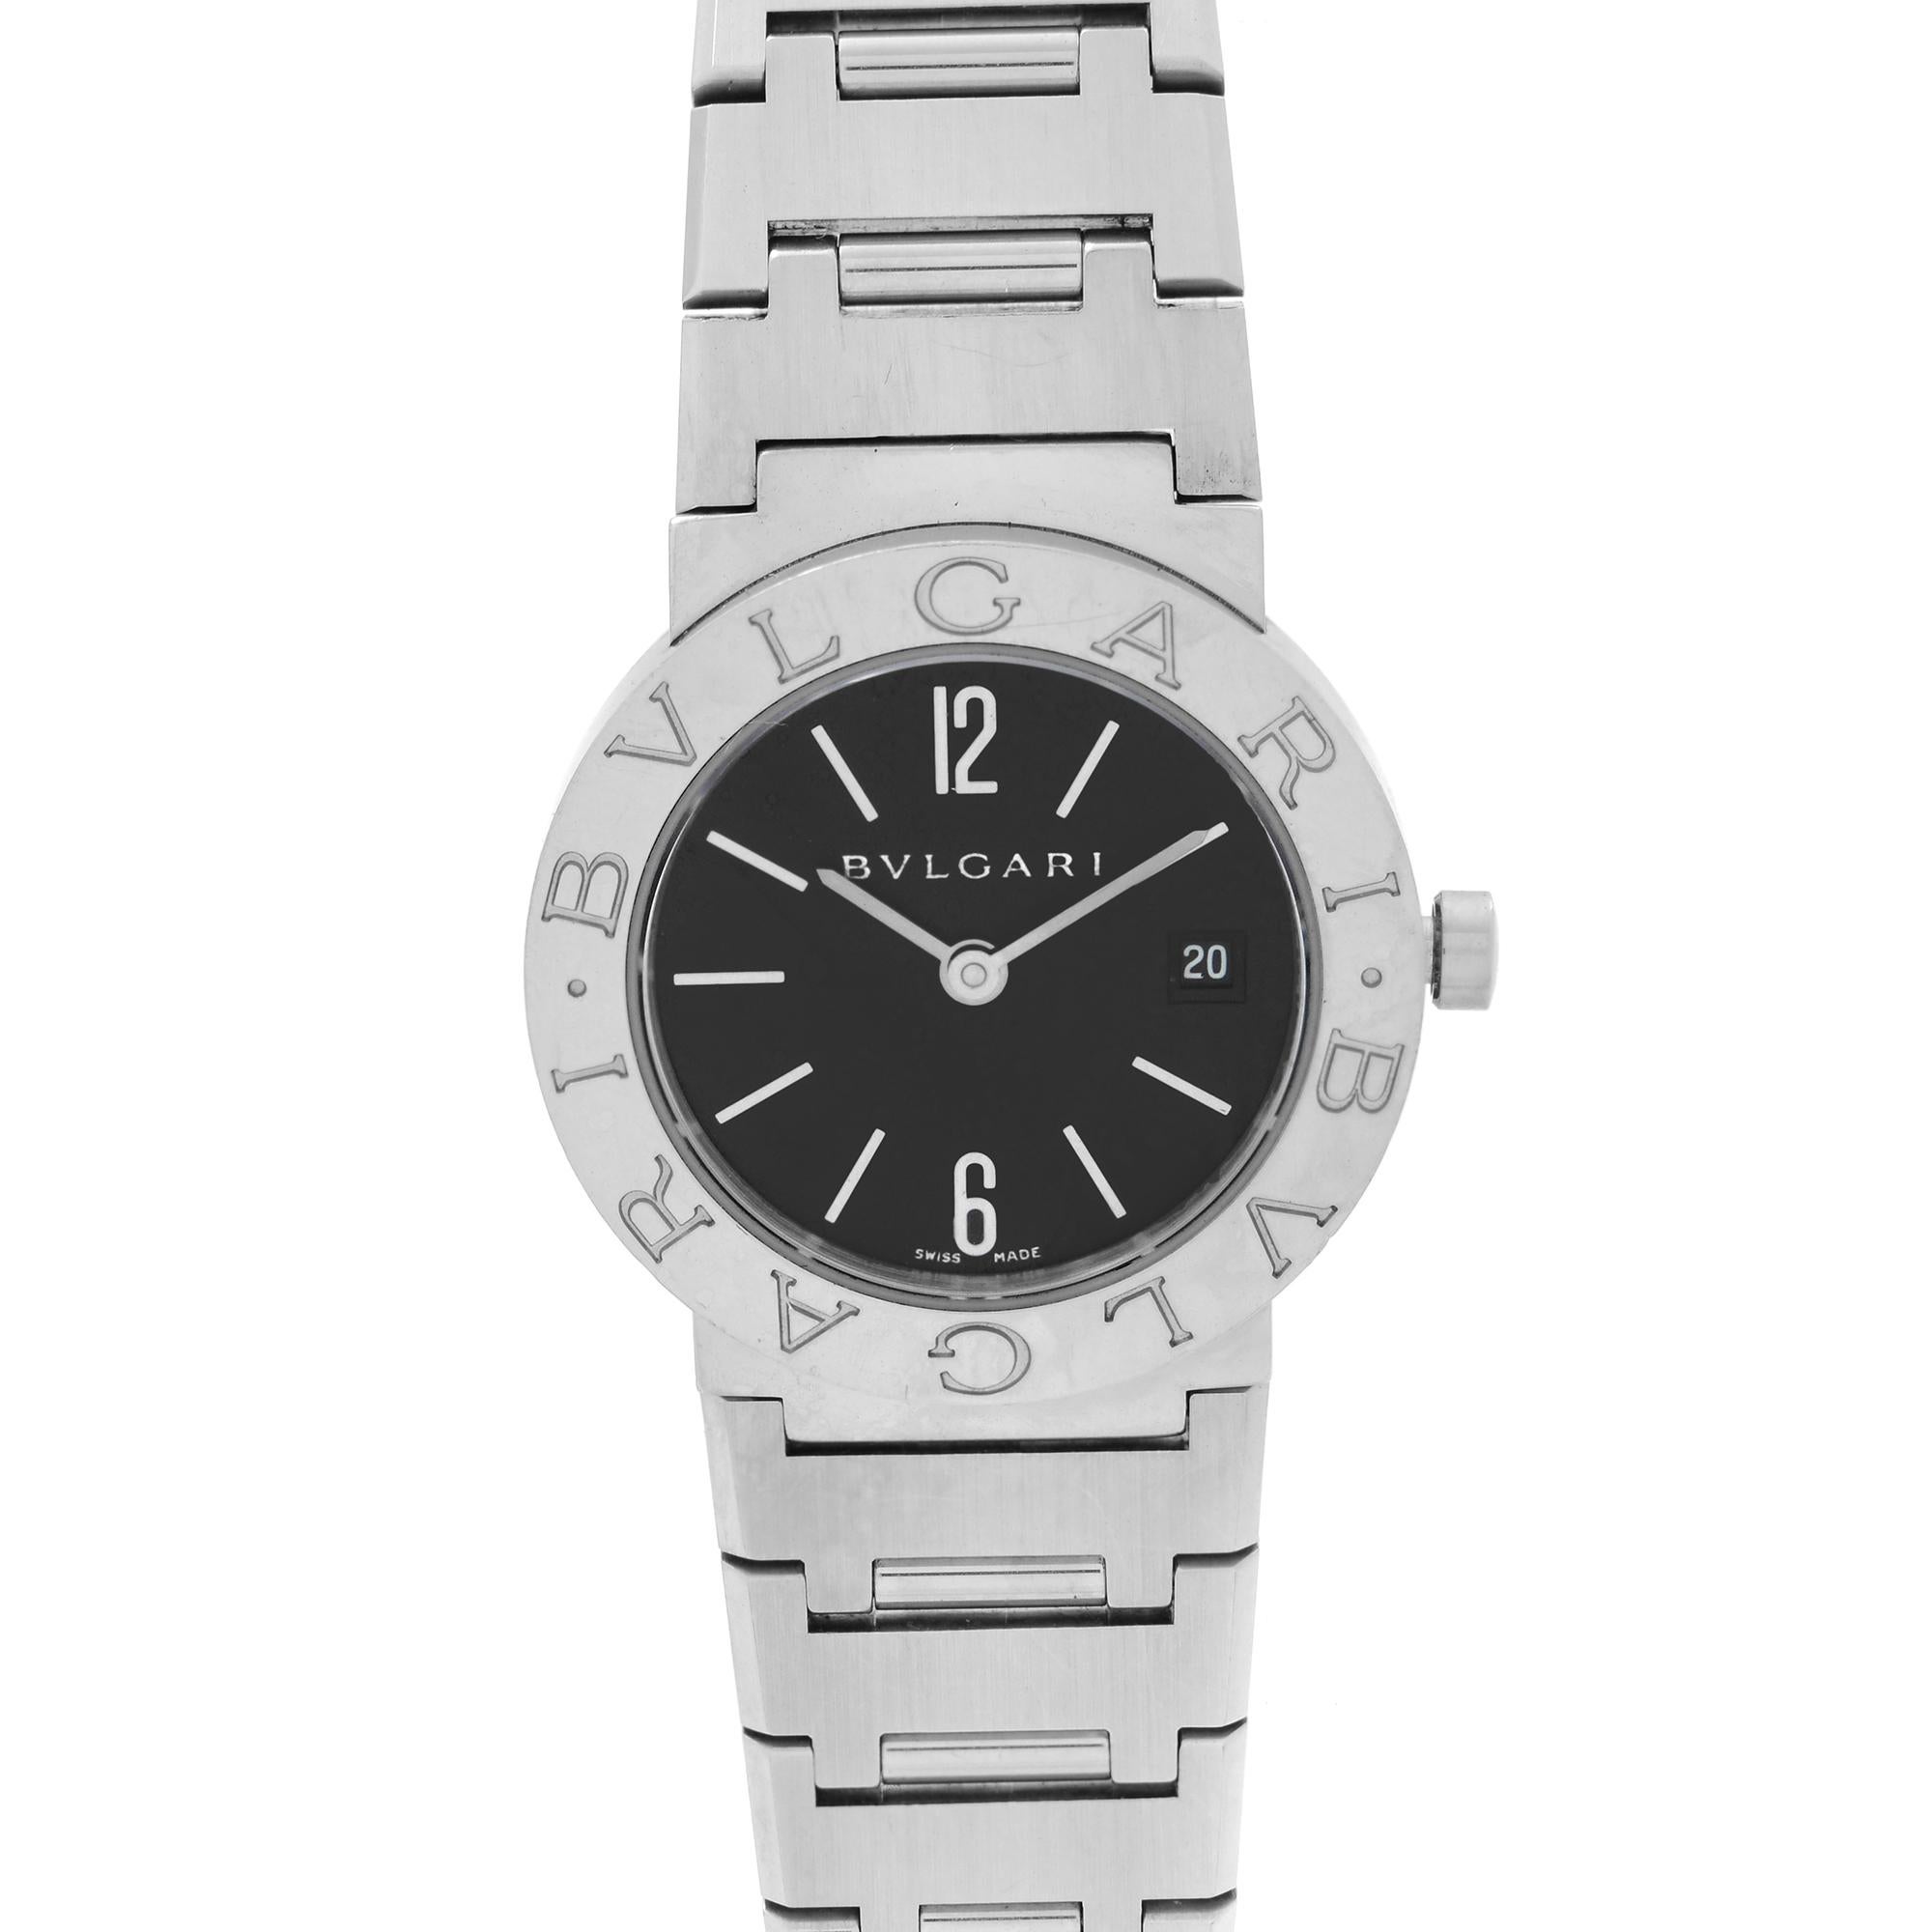 Pre-Owned Bvlgari 26mm Stainless Steel Date Black Dial Ladies Quartz Watch BB26SS. This Beautiful Timepiece Features: Stainless Steel Case and Bracelet. Fixed Steel Bezel, Black Dial with Silver-Tone Hands, and Index Hour Markers. Arabic numeral